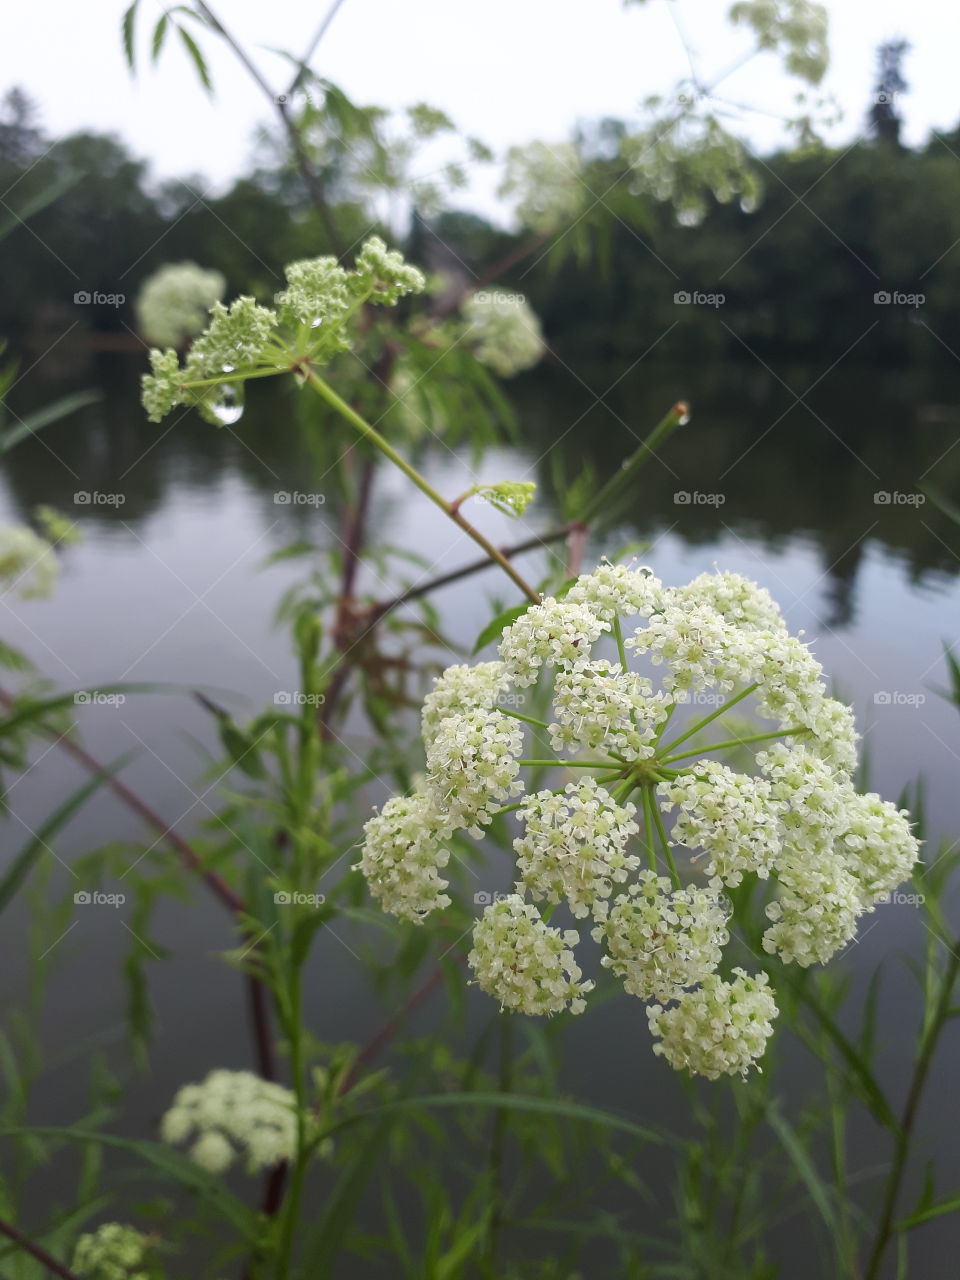 Queen Anne's lace by the Avon river